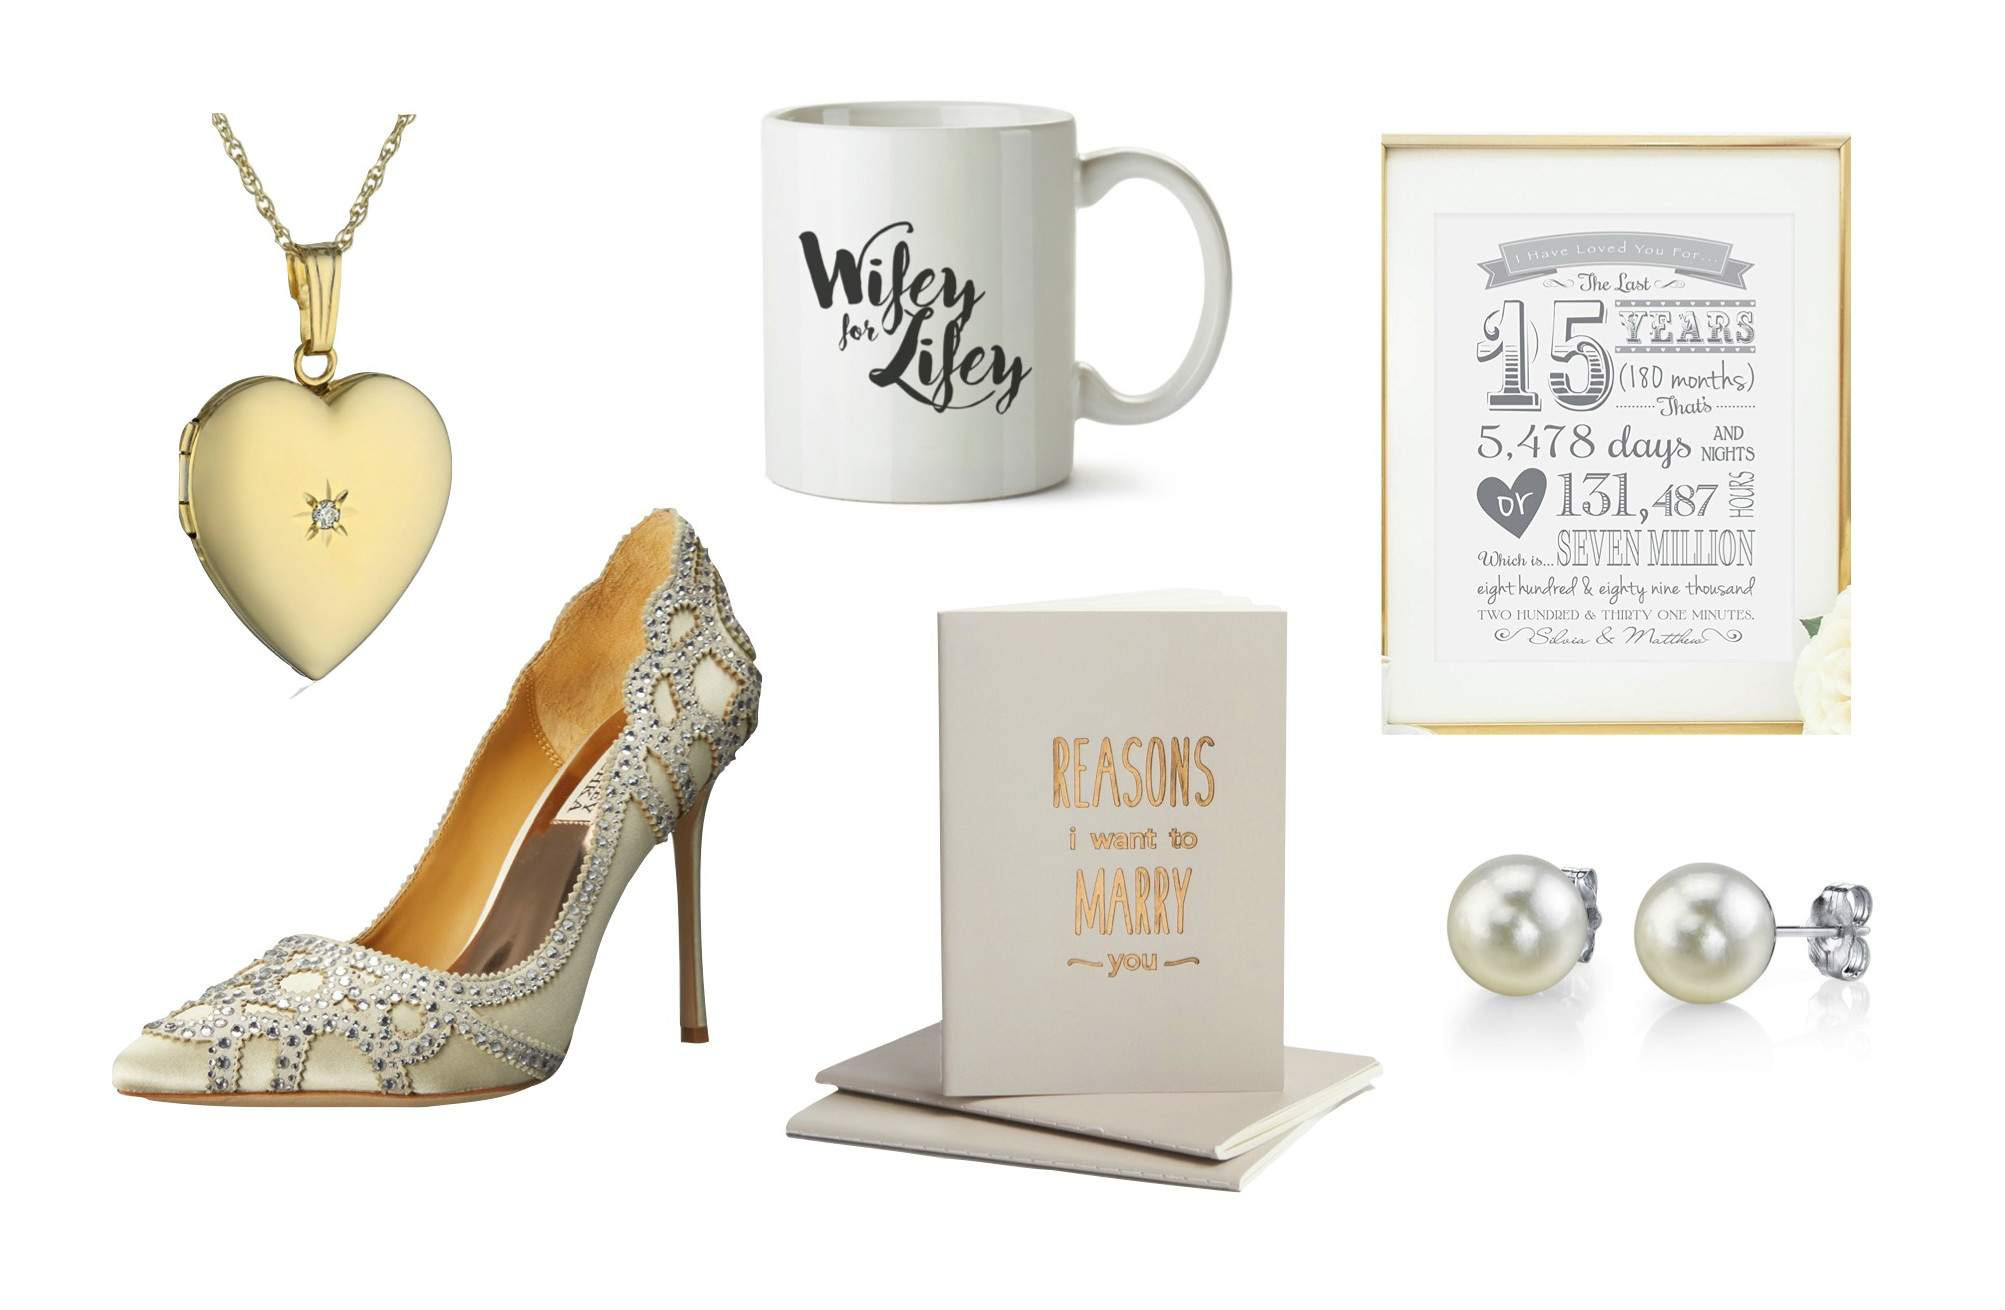 Wedding Gift Ideas For Bride And Groom
 Best Wedding Day Gift Ideas From the Groom to the Bride